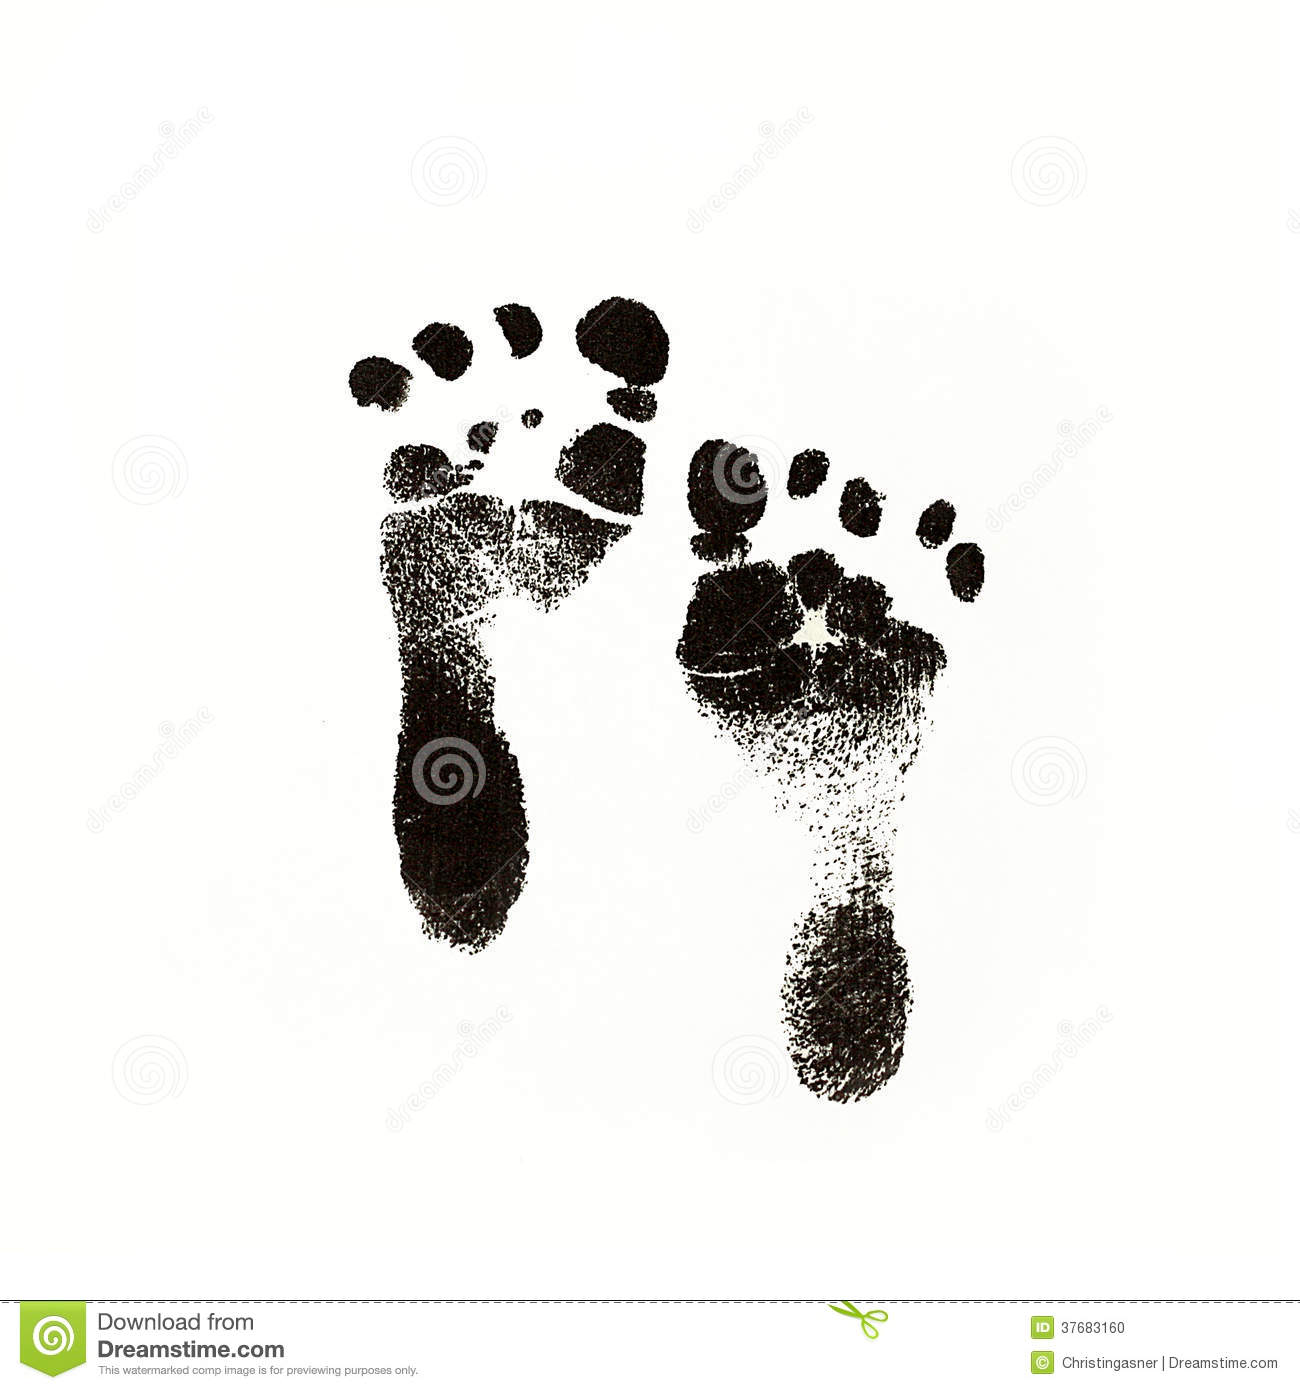 Of Newborn Baby Footprints Made With Black In On White Dquare Paper